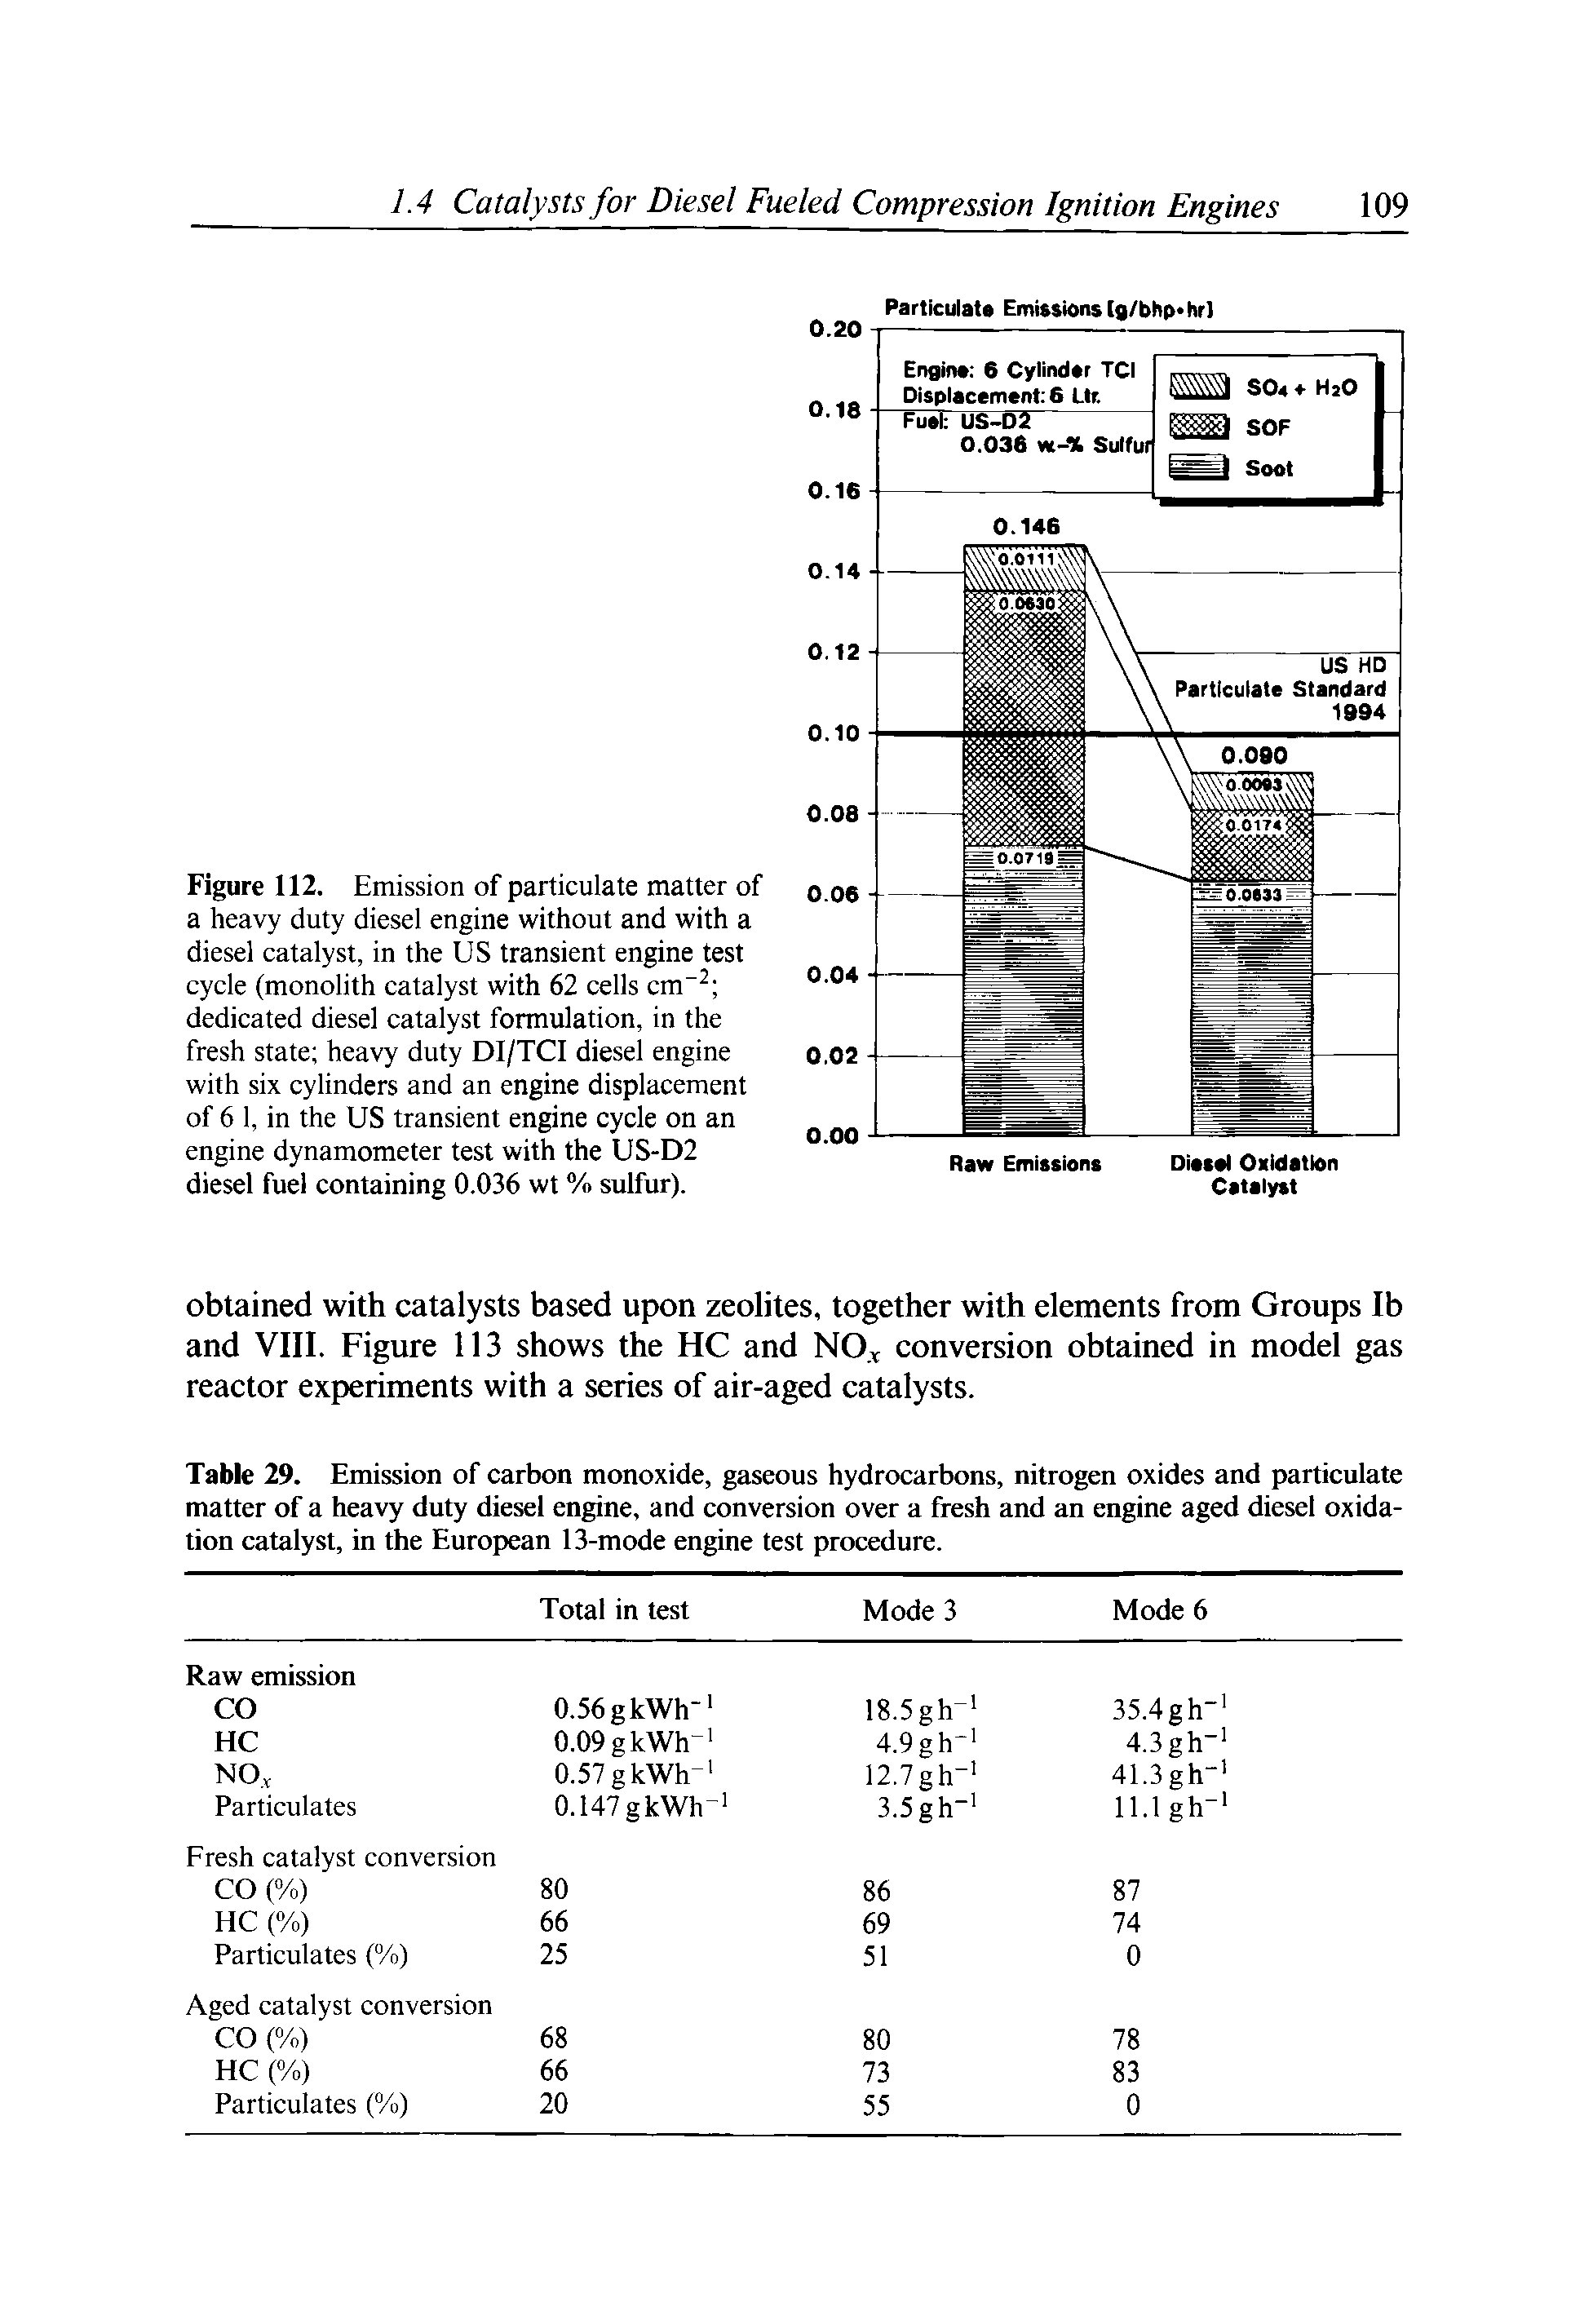 Figure 112. Emission of particulate matter of a heavy duty diesel engine without and with a diesel catalyst, in the US transient engine test cycle (monolith catalyst with 62 cells cm" dedicated diesel catalyst formulation, in the fresh state heavy duty DI/TCI diesel engine with six cylinders and an engine displacement of 6 1, in the US transient engine cycle on an engine dynamometer test with the US-D2 diesel fuel containing 0.036 wt % sulfur).